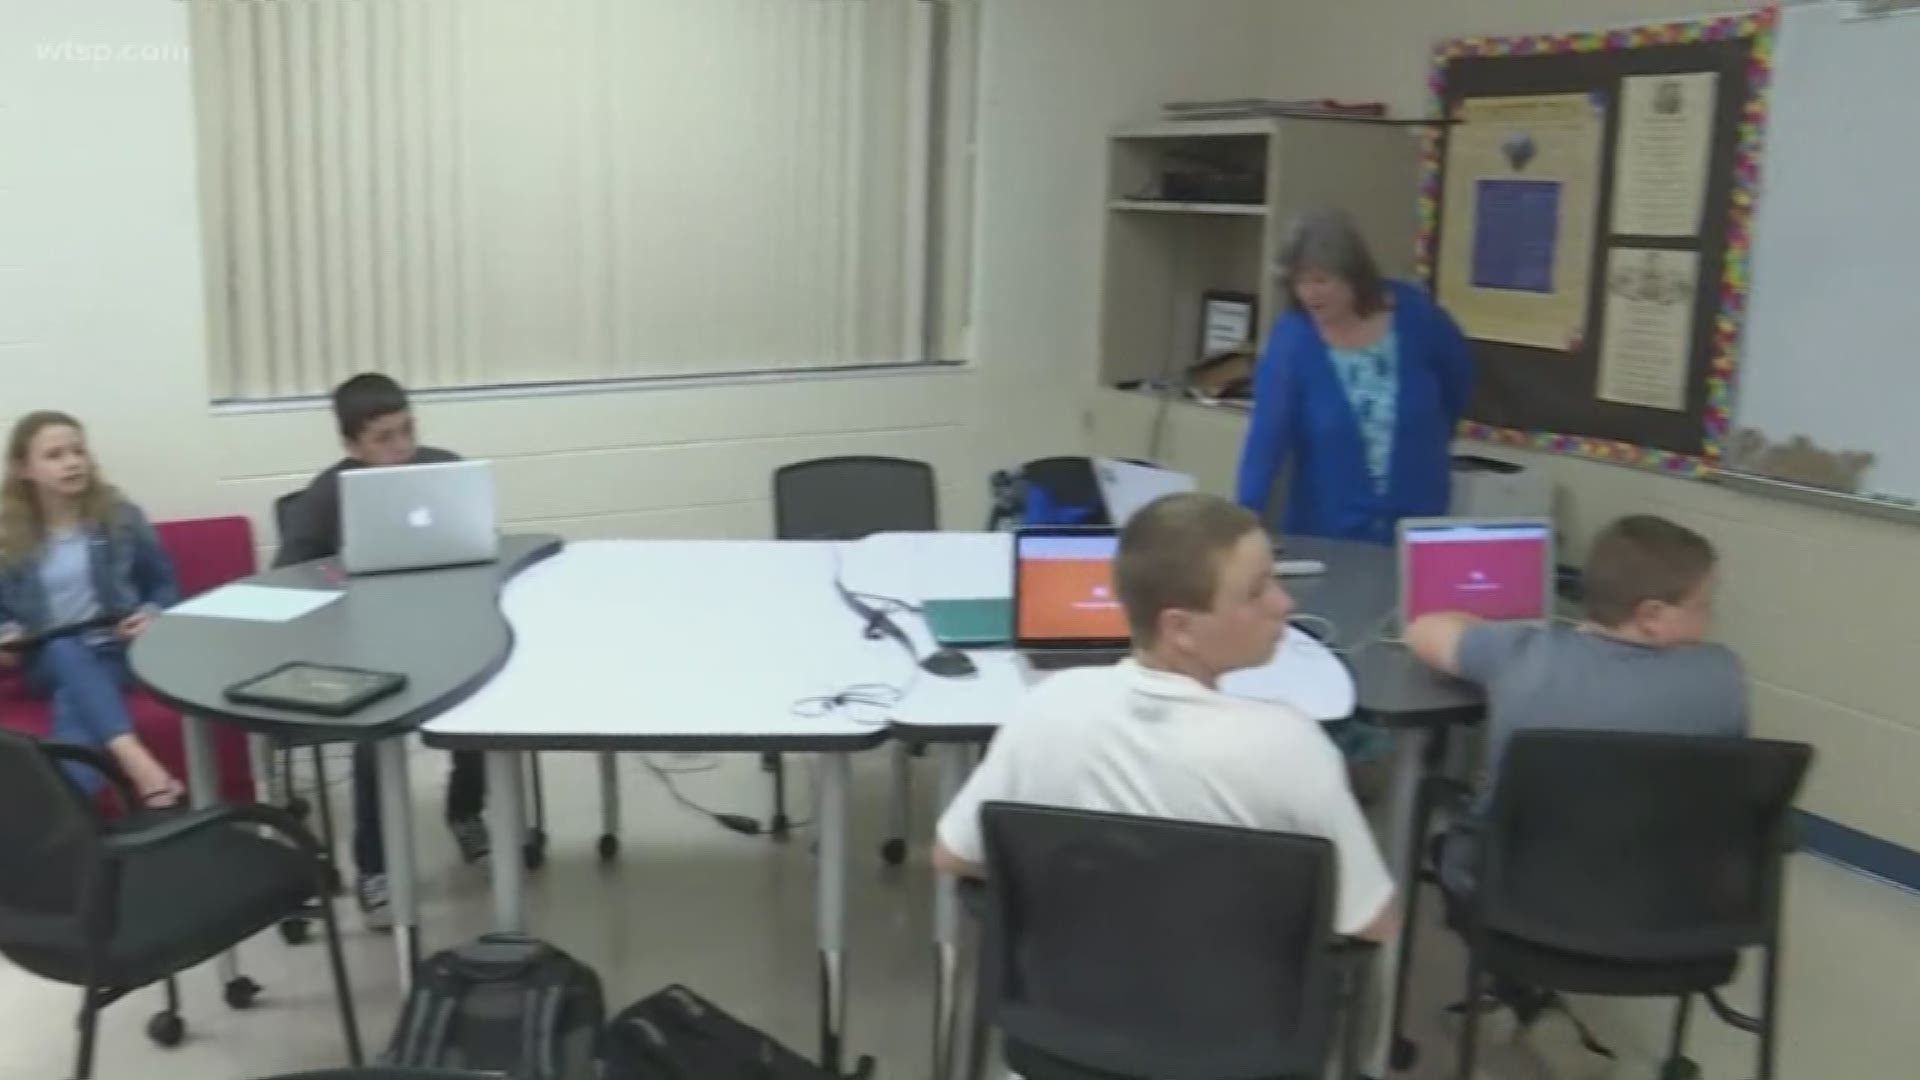 Pasco eSchool Prinicpal JoAnne Glenn spoke on how her school district operates and on being named the 10News School of the Week powered by Duke Energy Florida. https://on.wtsp.com/2FQgXI9